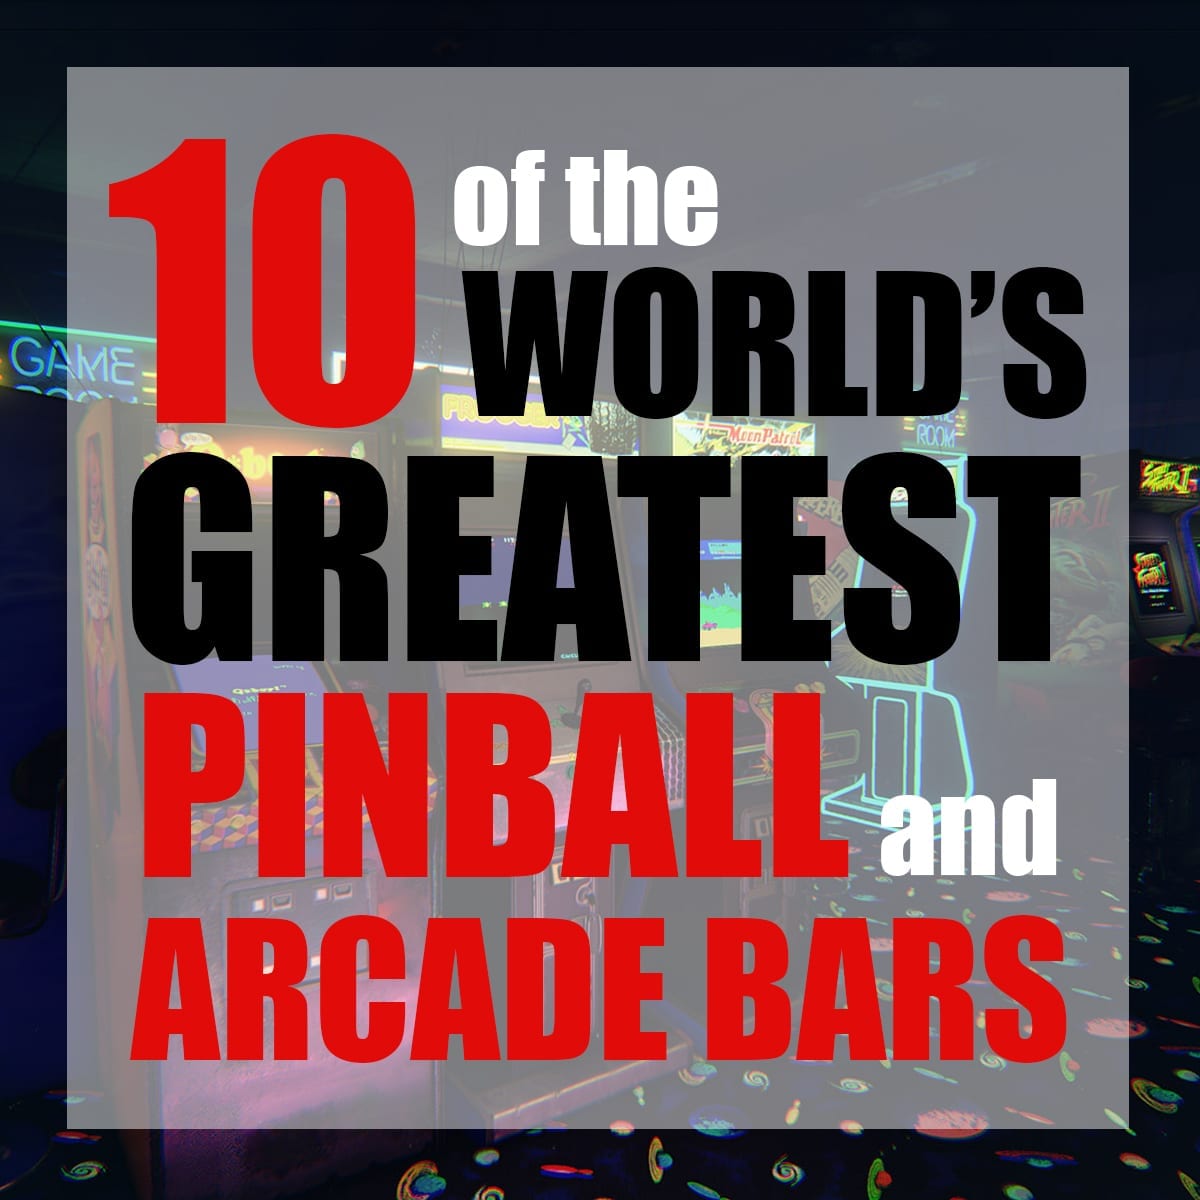 10 of the World’s Greatest Pinball and Arcade Bars